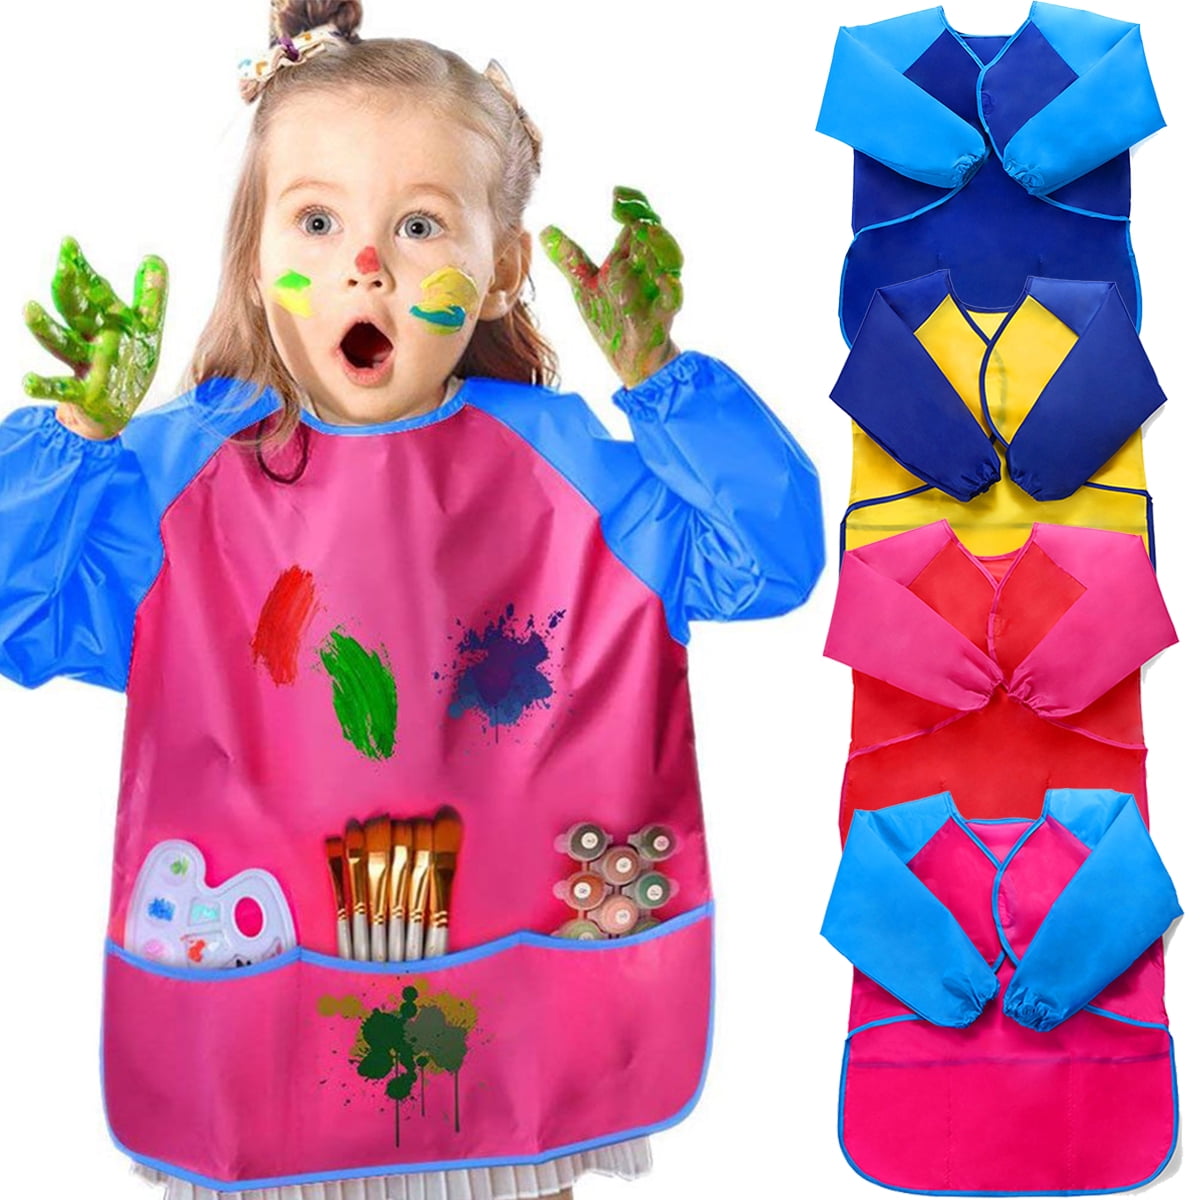 Pack of 2 Kids Art Smocks, Children Waterproof Artist Painting Aprons Long  Sleeve with 3 Pockets for Age 2-7 Years Gifts